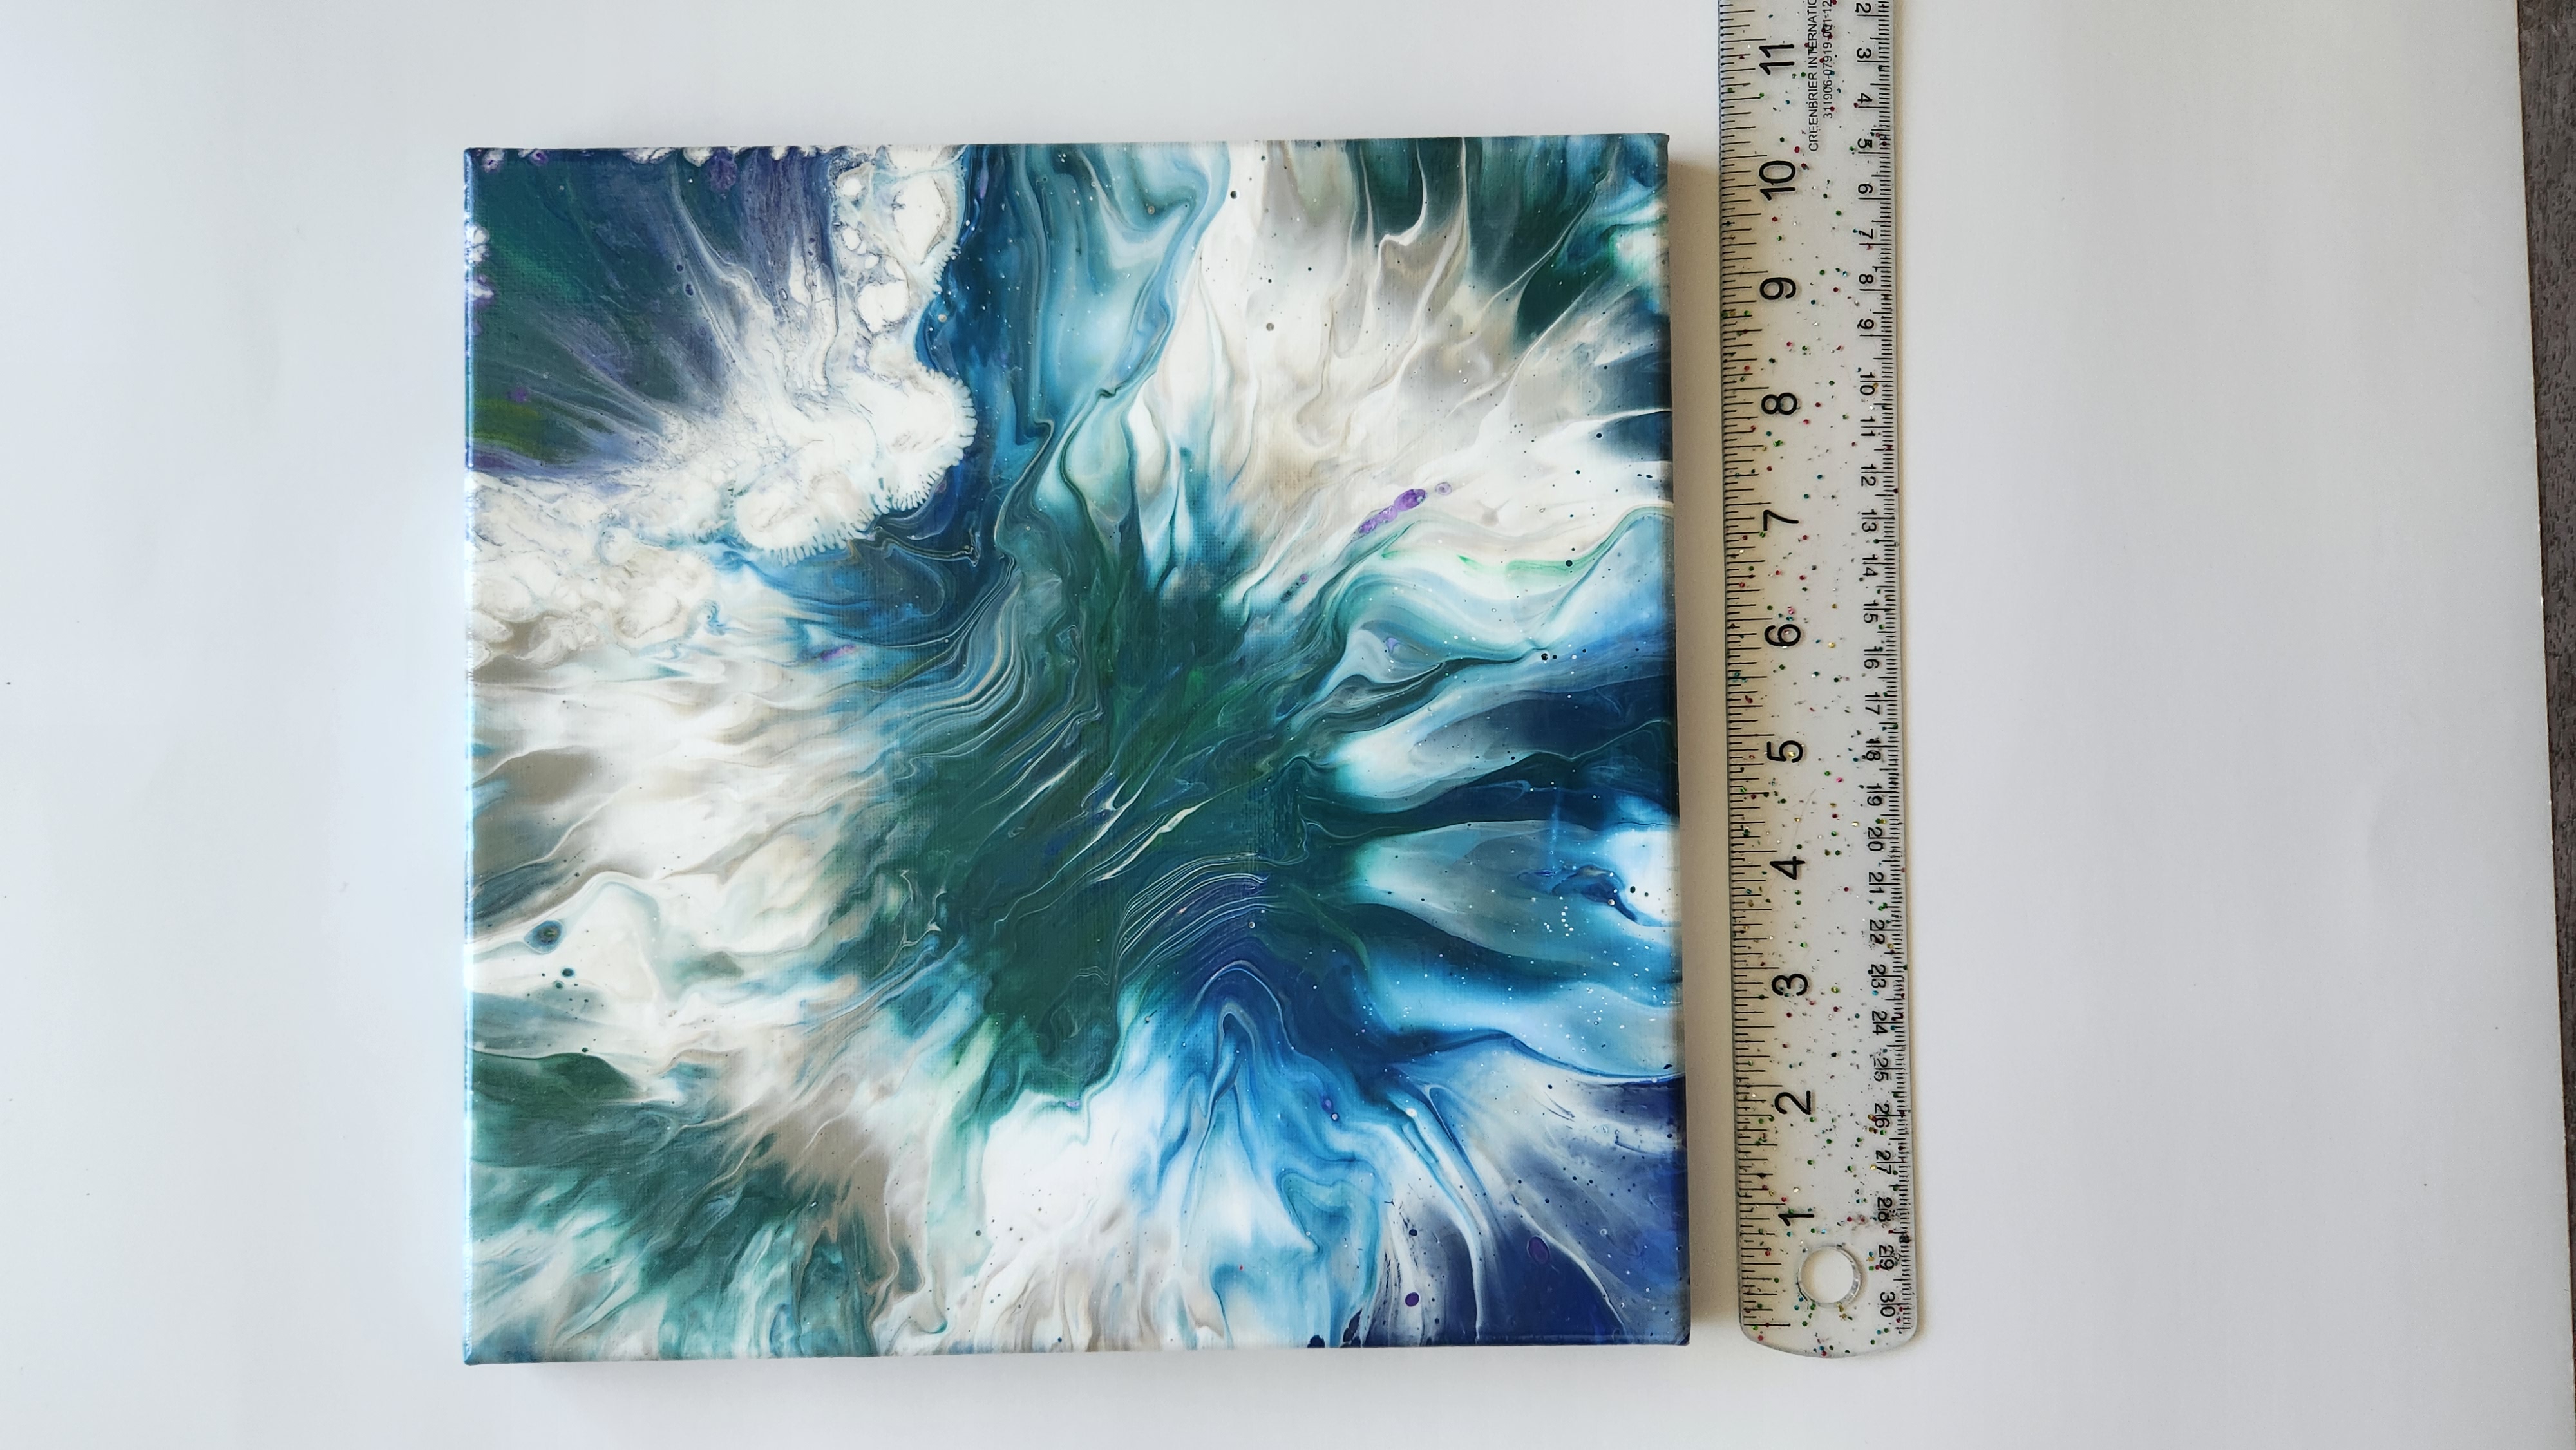 Acrylic Painting, Abstract Fluid Art on a Stretched Canvas, 10x10 Inch,  Modern Art Work, Original 